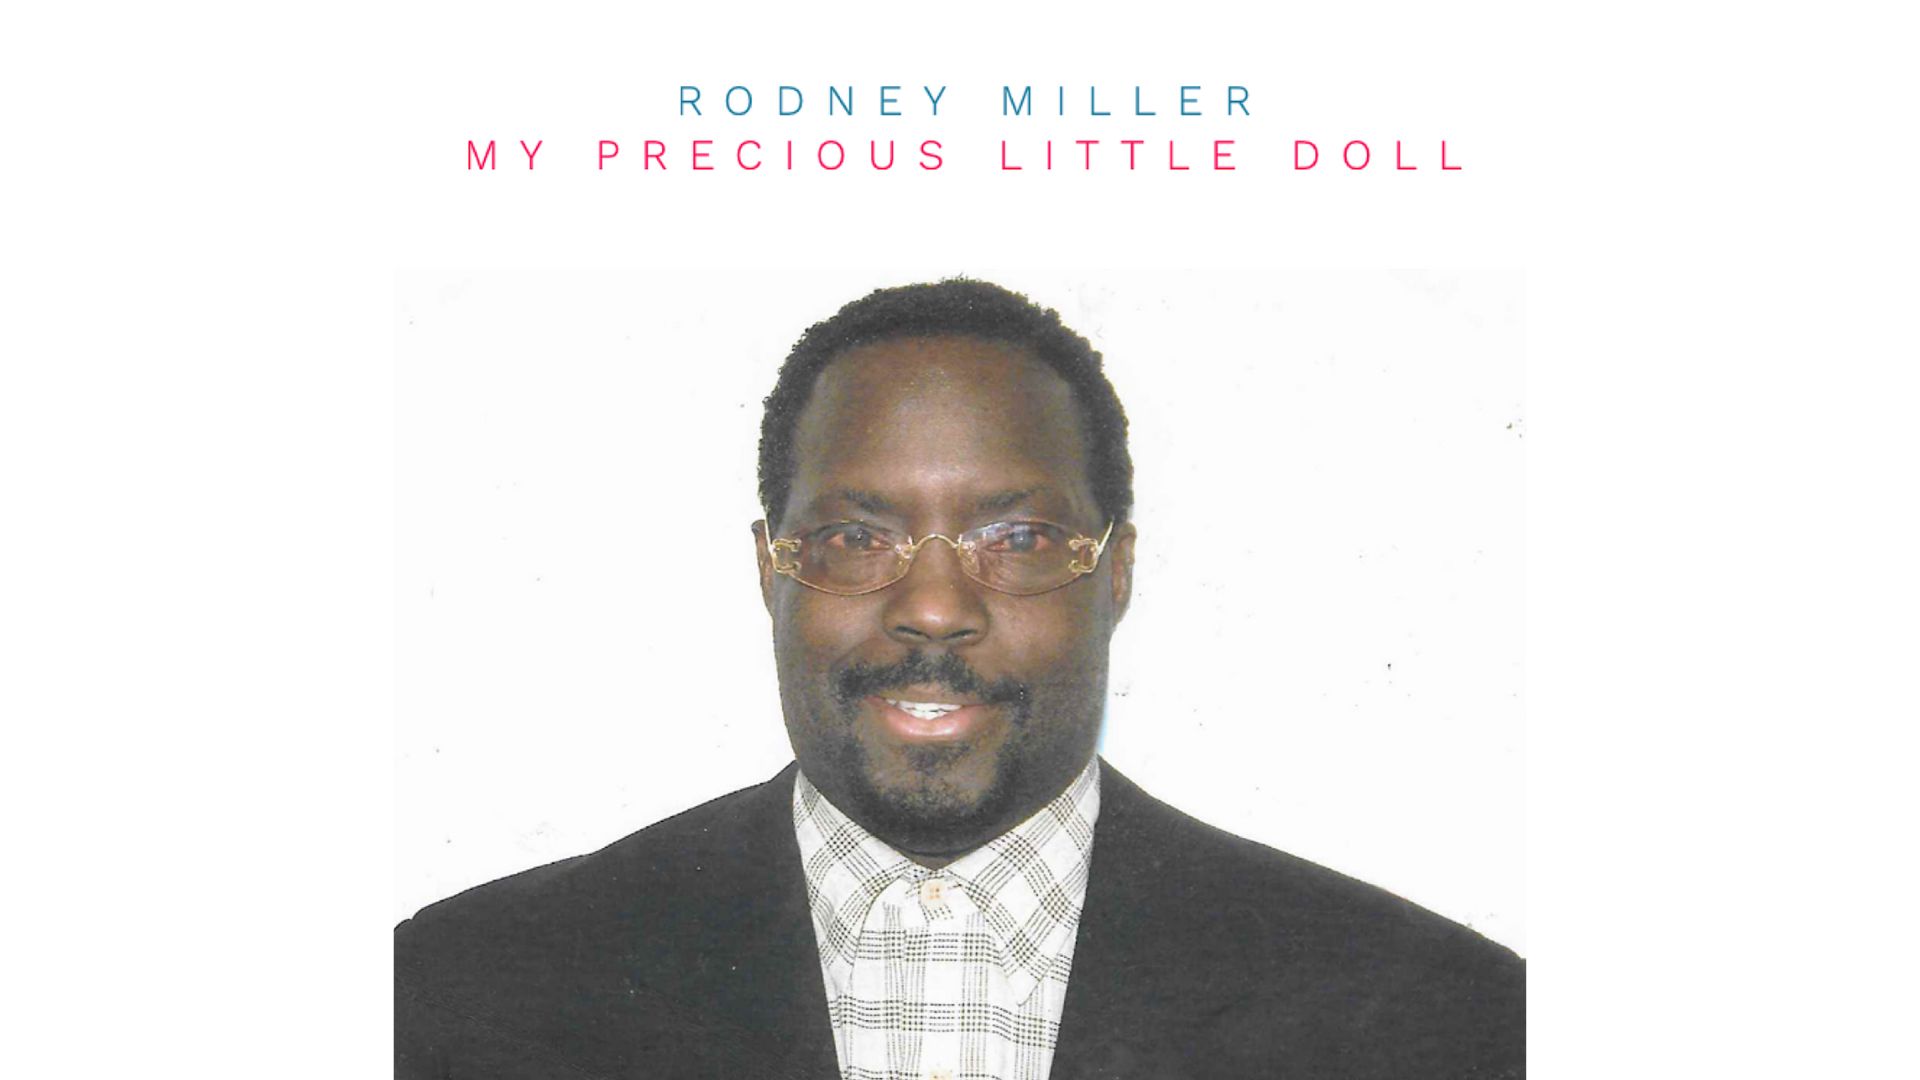 The new single ‘My Precious Little Doll’ from ‘Rodney Miller’ with it’s strong and creative songwriting and addictive melody is on the Bafana FM playlist now.